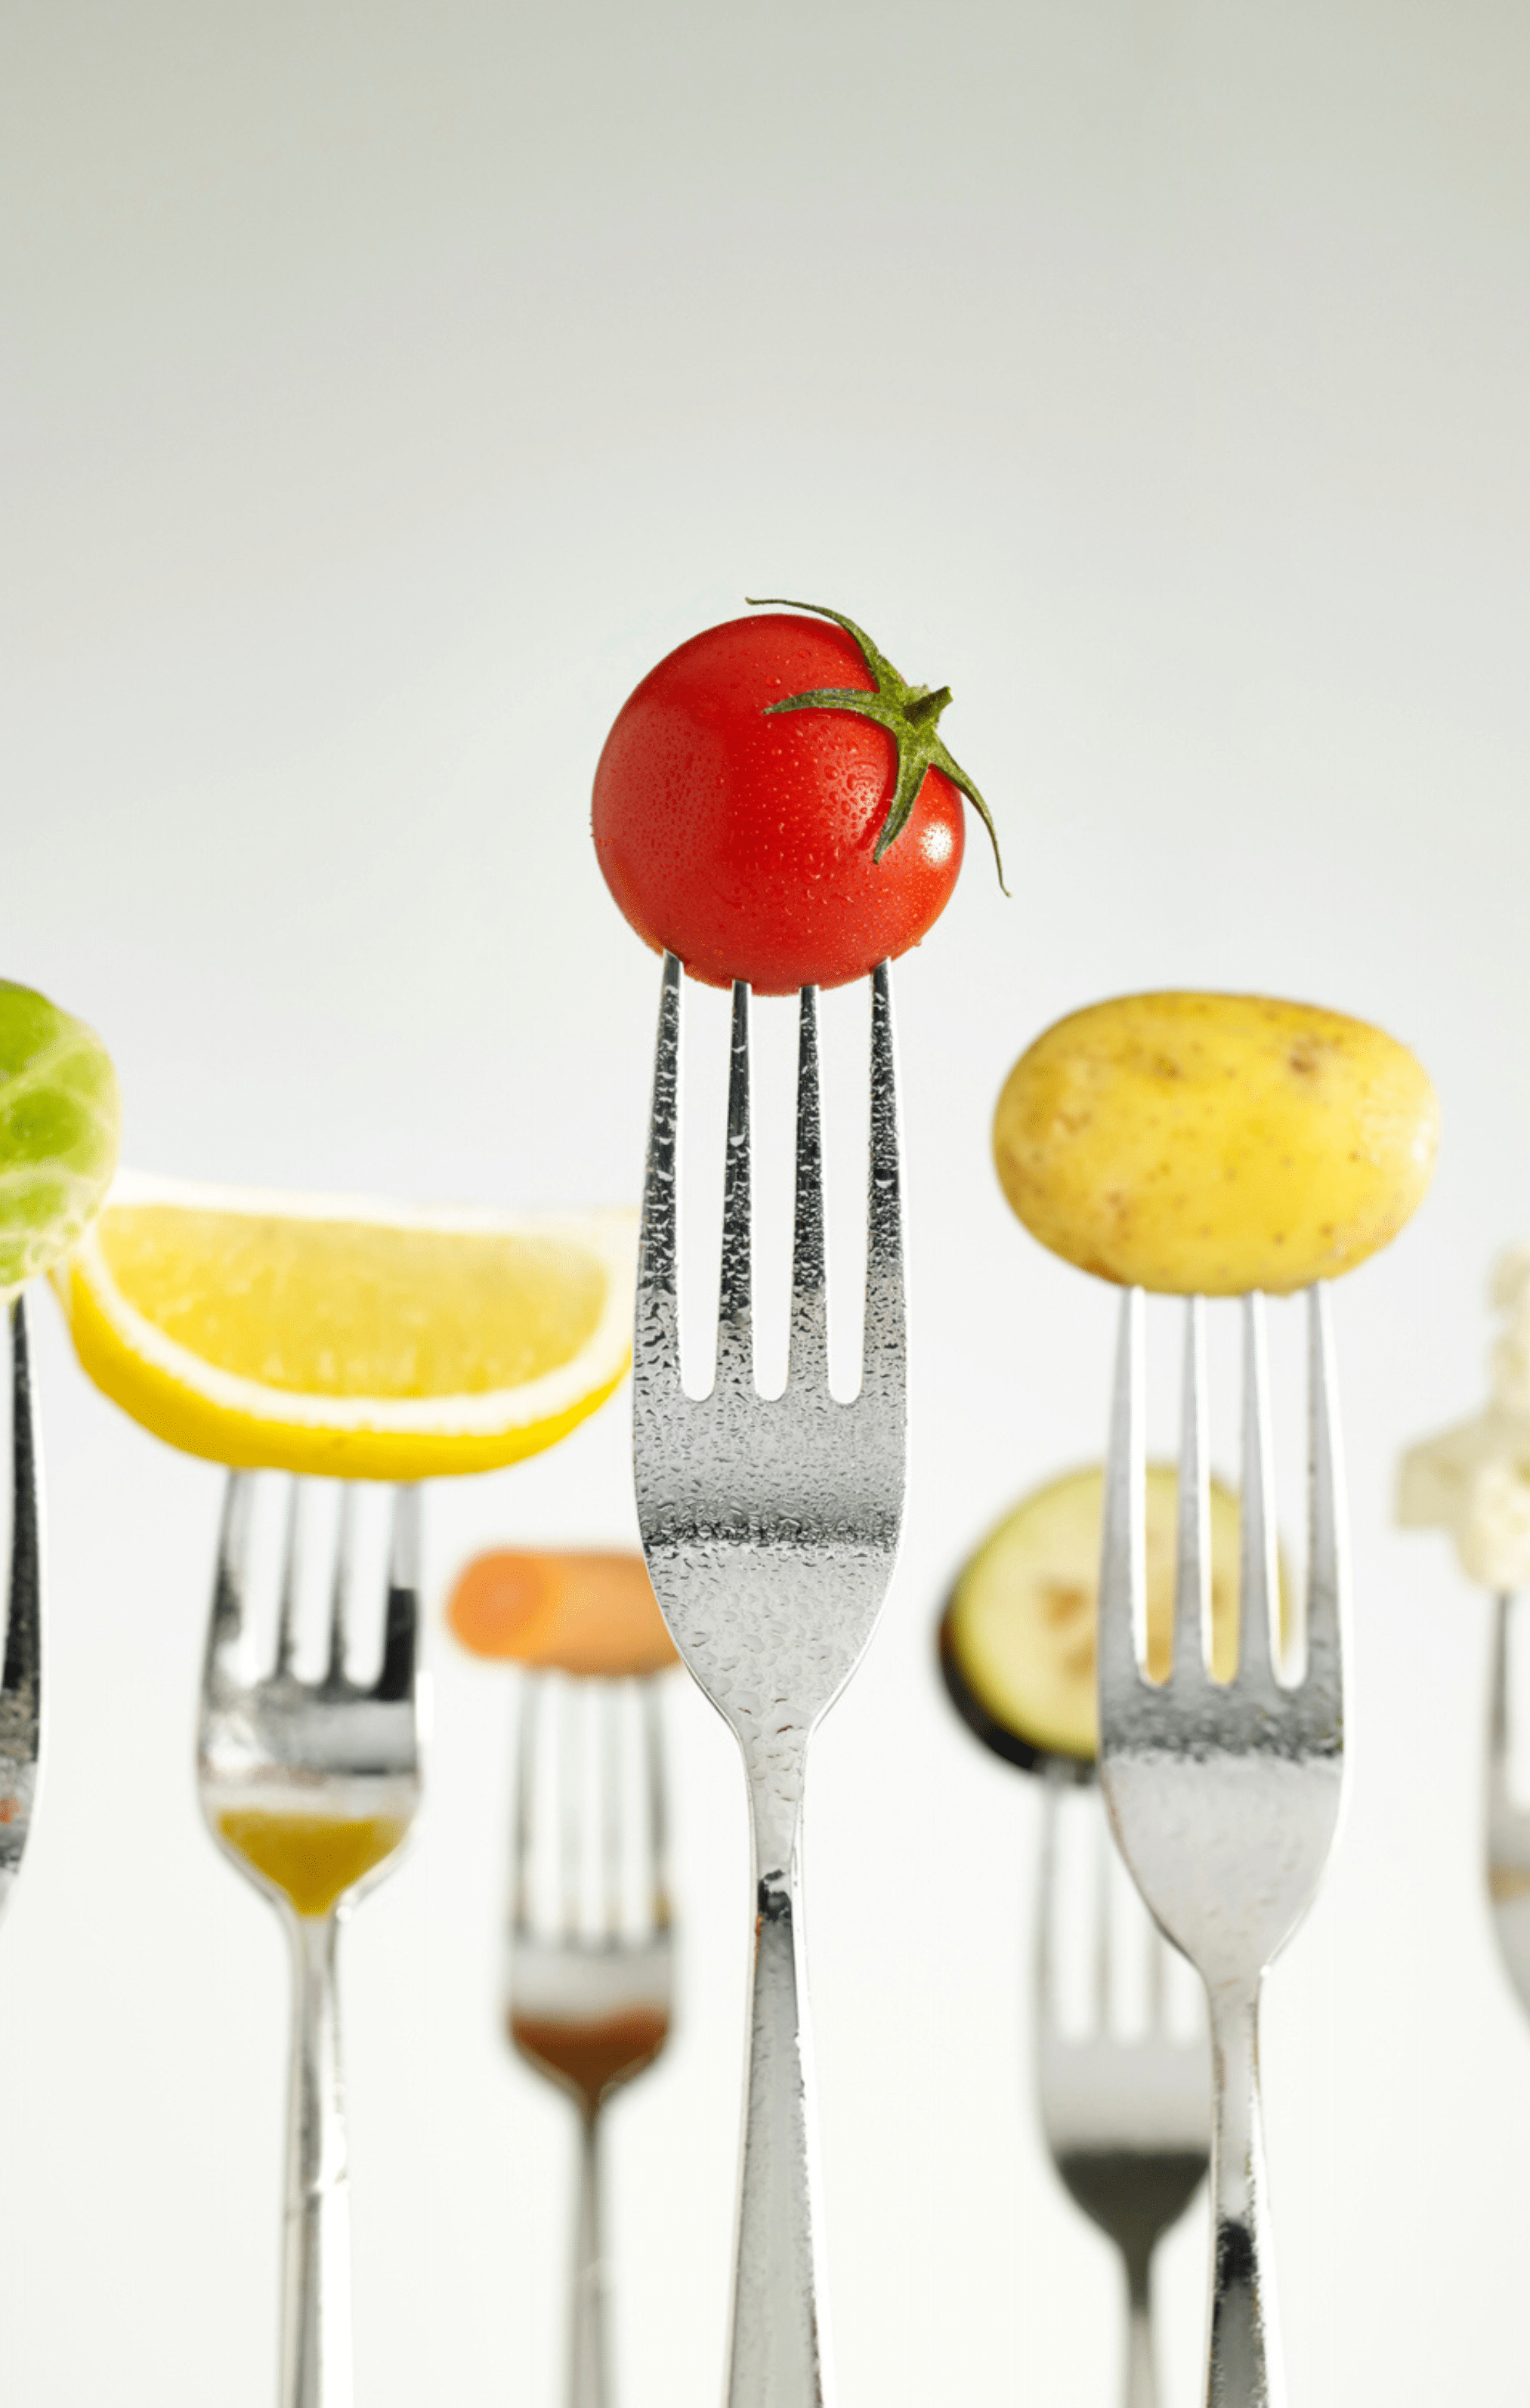 Fruits and vegetable pieces each on the end of an individual fork.